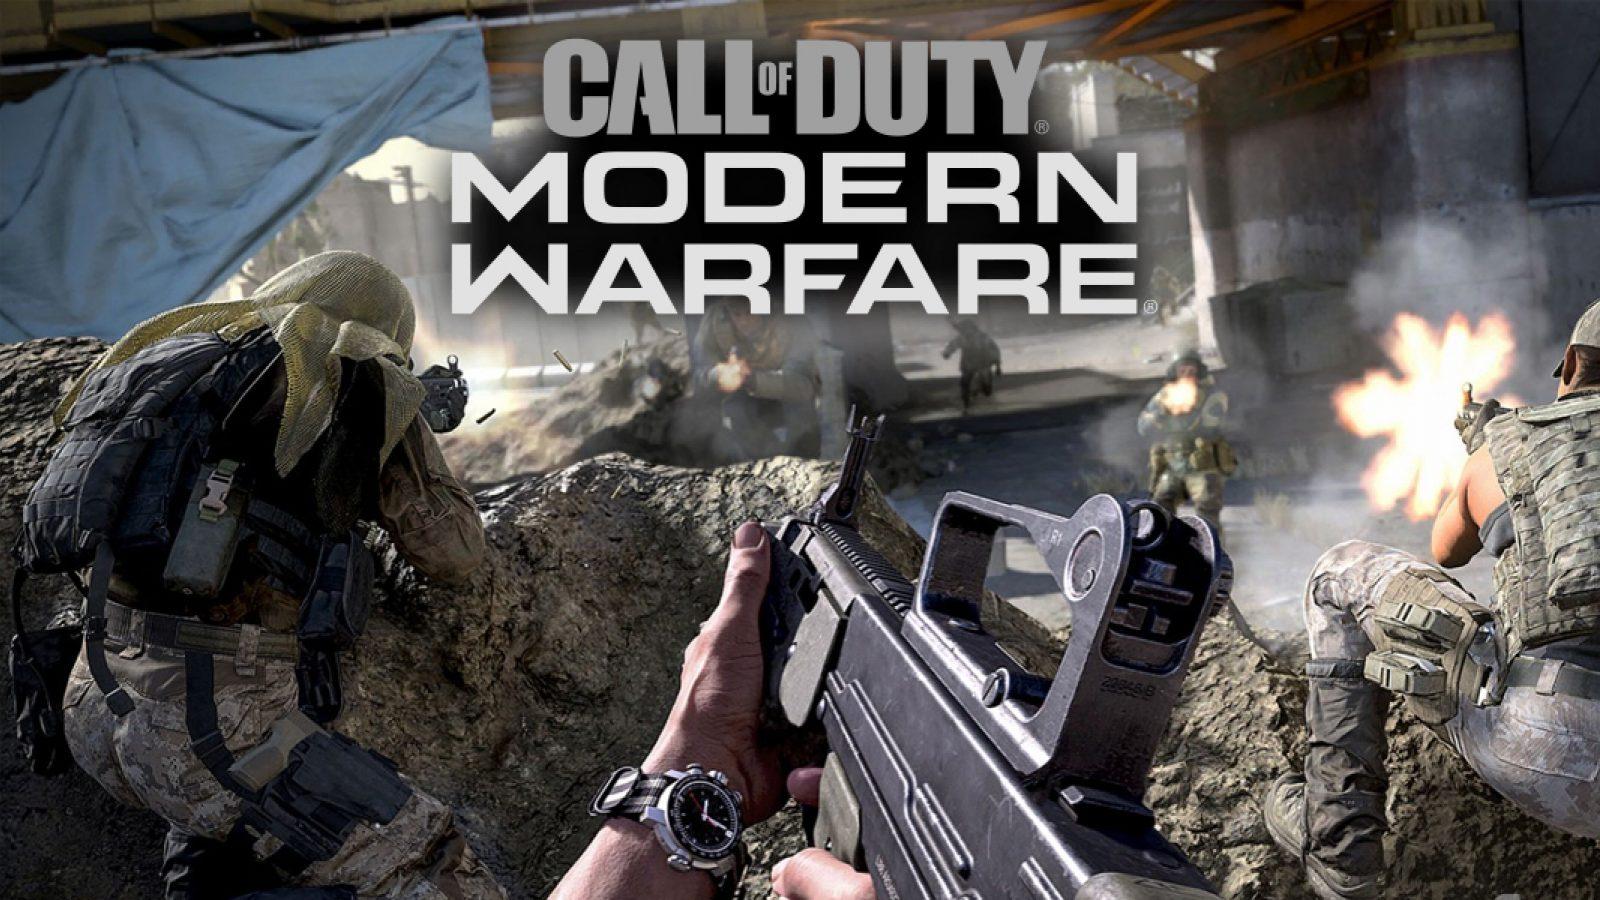 Preparing for the New Era of Call of Duty®, Presented by Infinity Ward